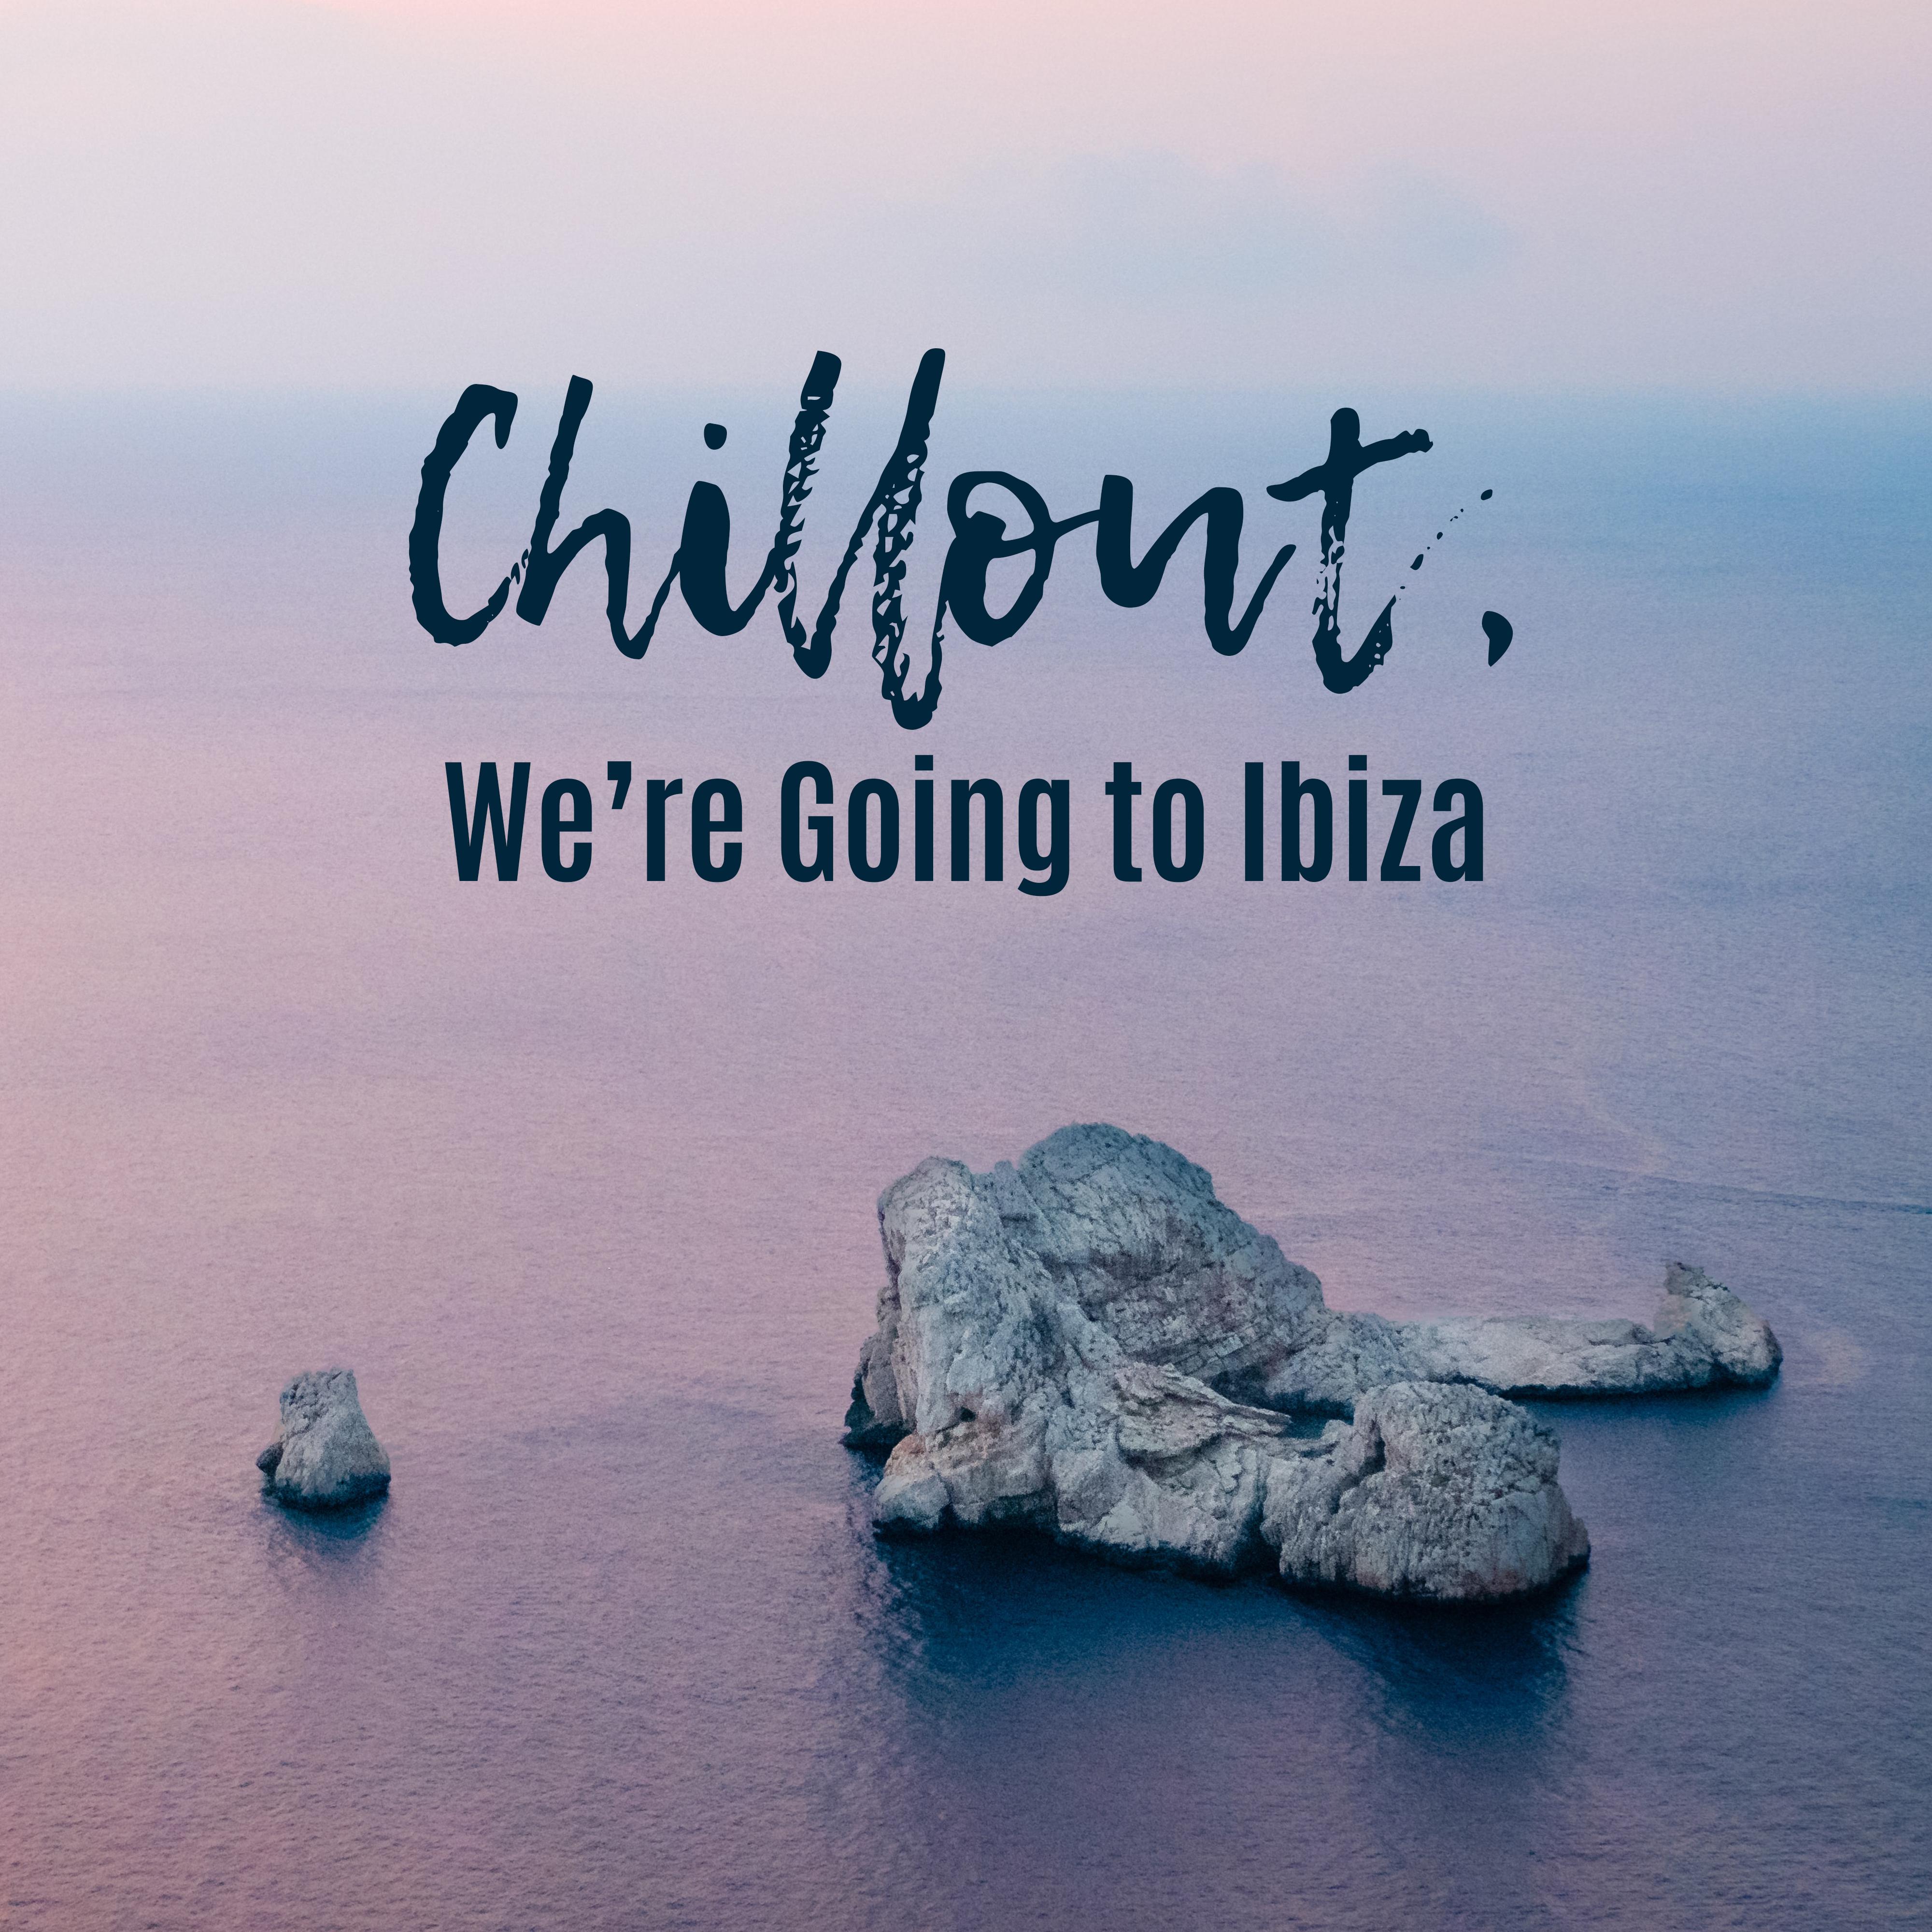 Chillout, We' re Going to Ibiza: 2019 Chill Out Vacation Mix, Music Perfect for Celebrating Summer Holiday in Ibiza, Total Relaxation on the Beach, Sunbathing, Beach Drink Bar Songs